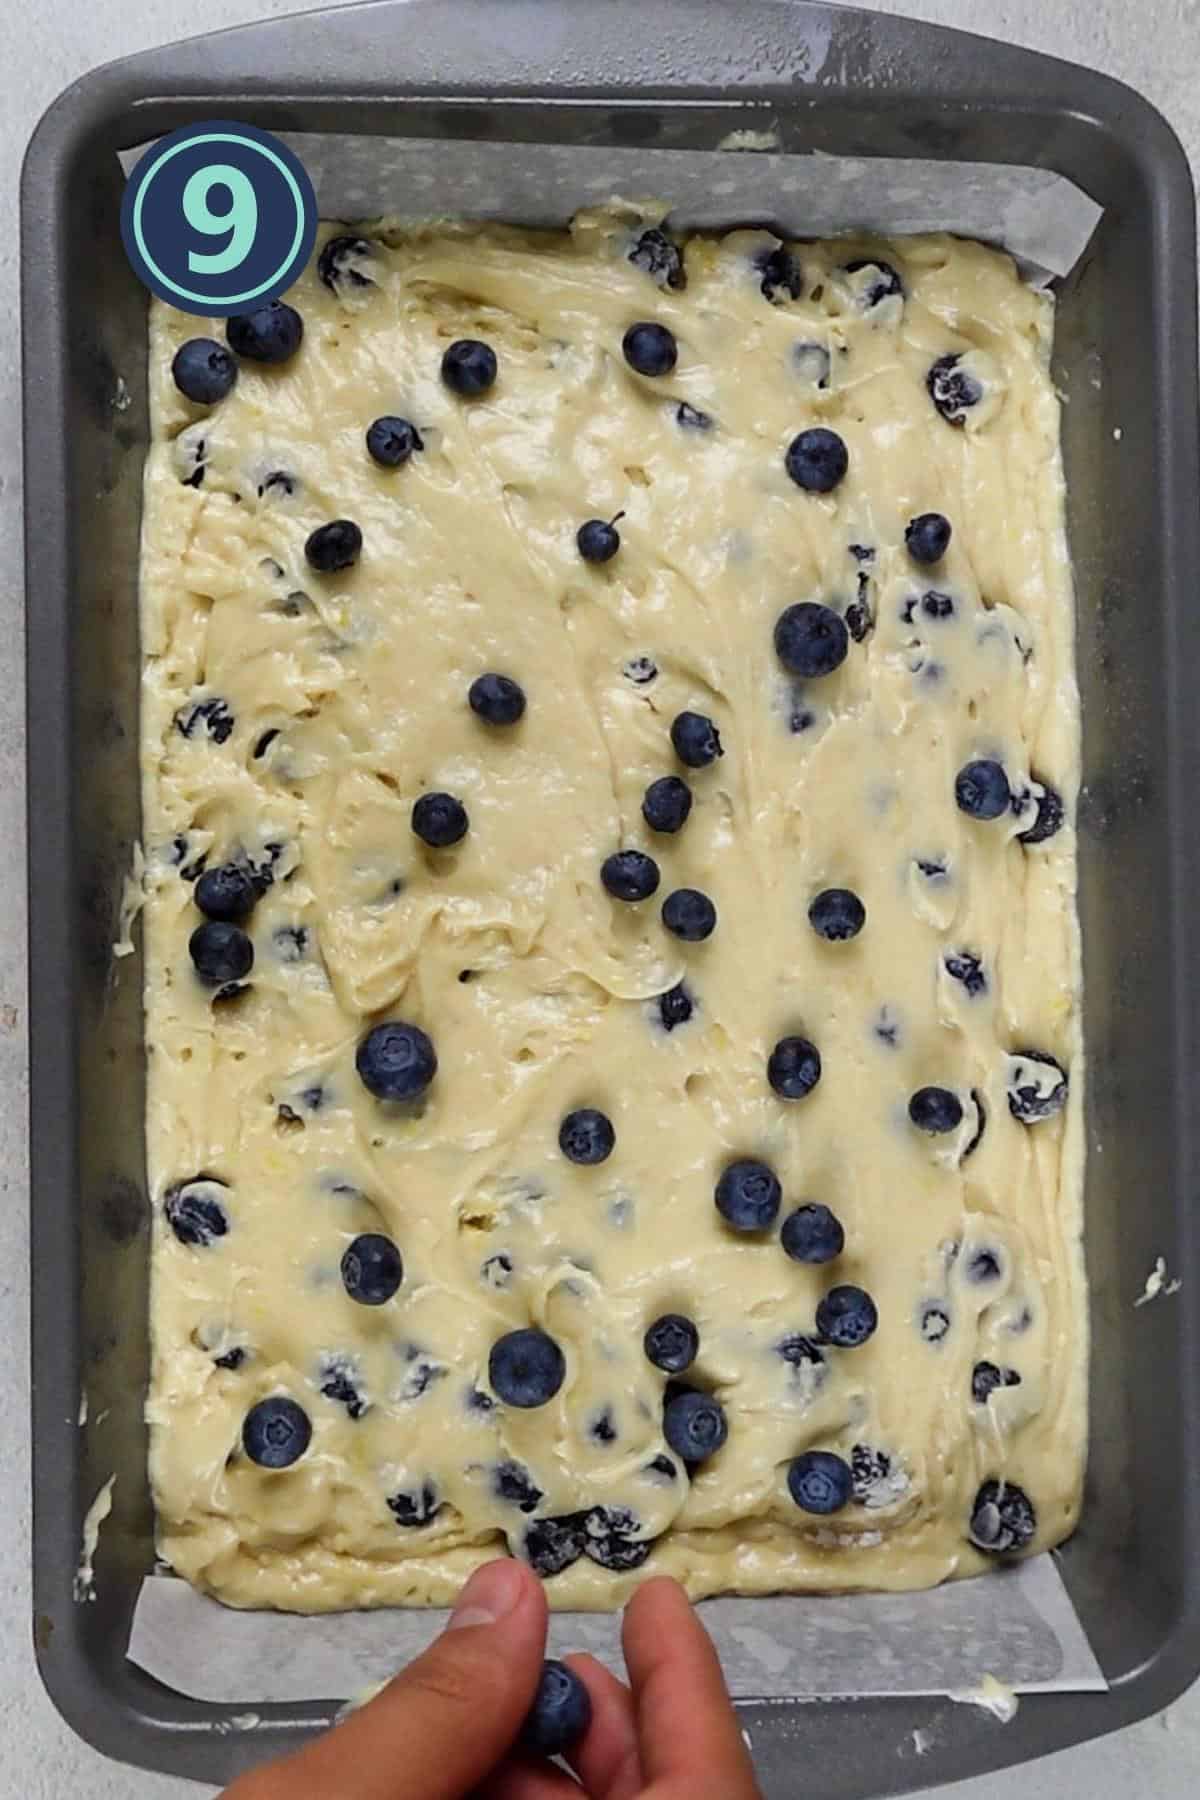 sprinkling blueberries on the top of the cake batter.